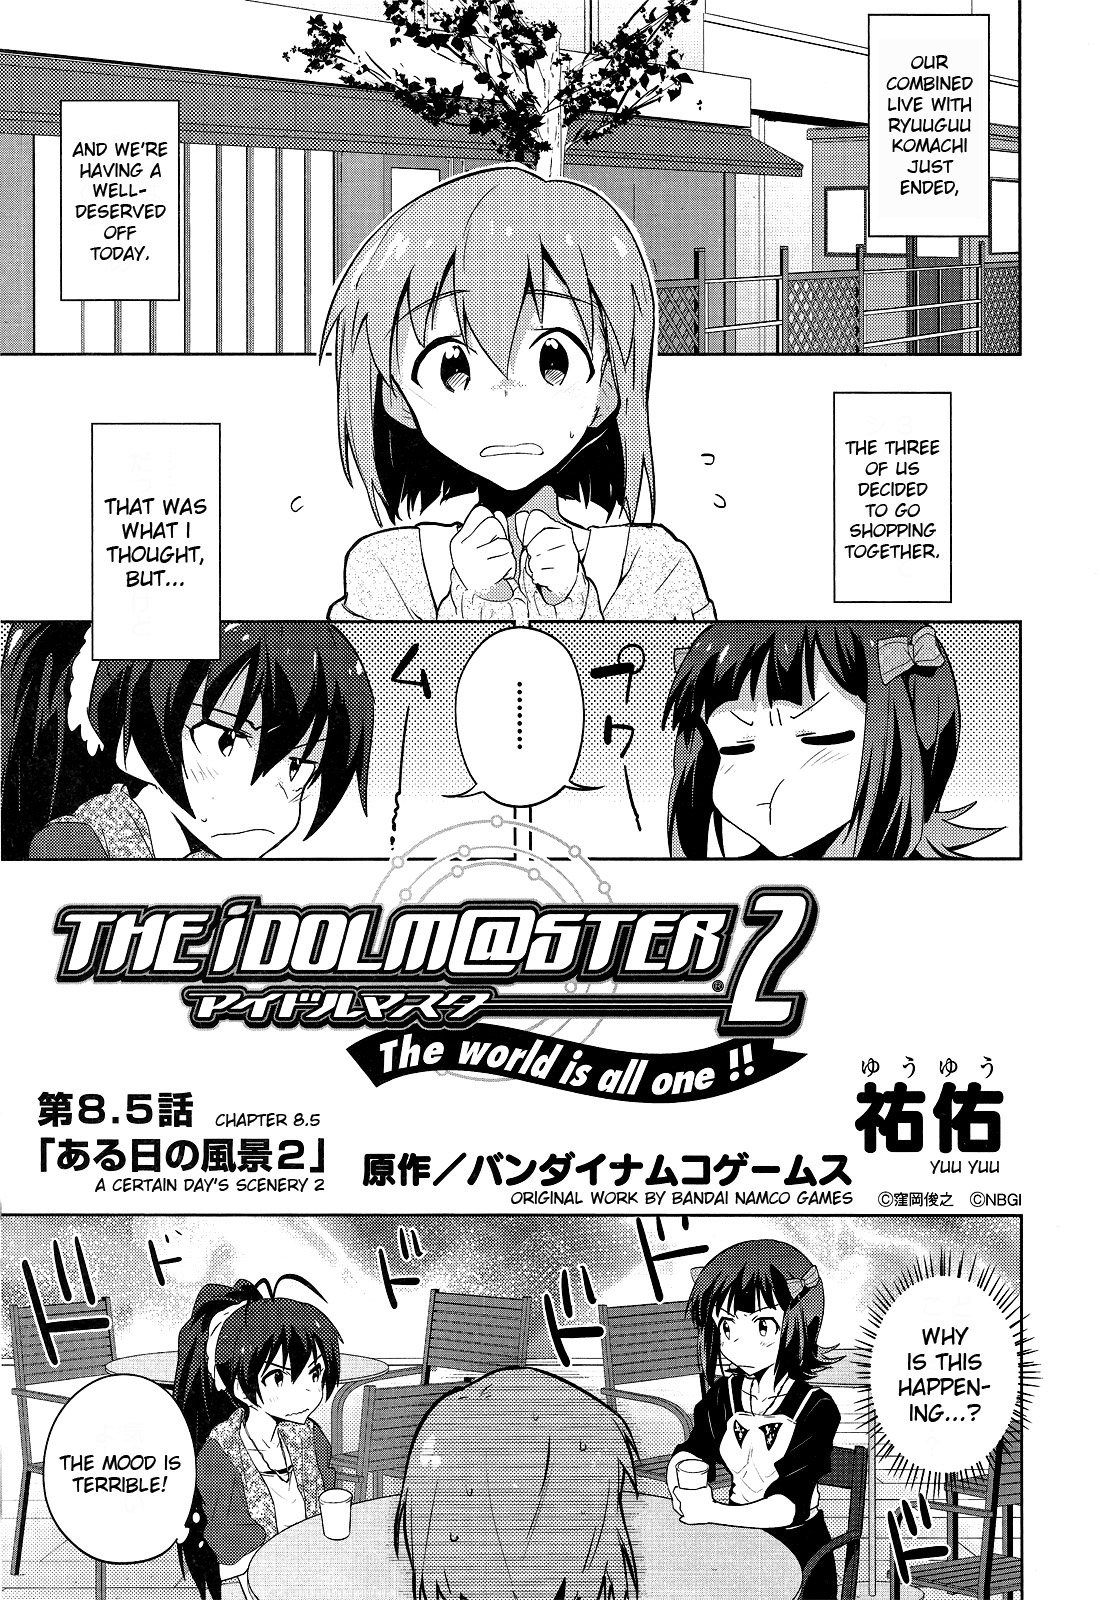 THE iDOLM@STER 2 The world is all one!! Vol. 2 Ch. 8.5 A Certain Day's Scenery 2